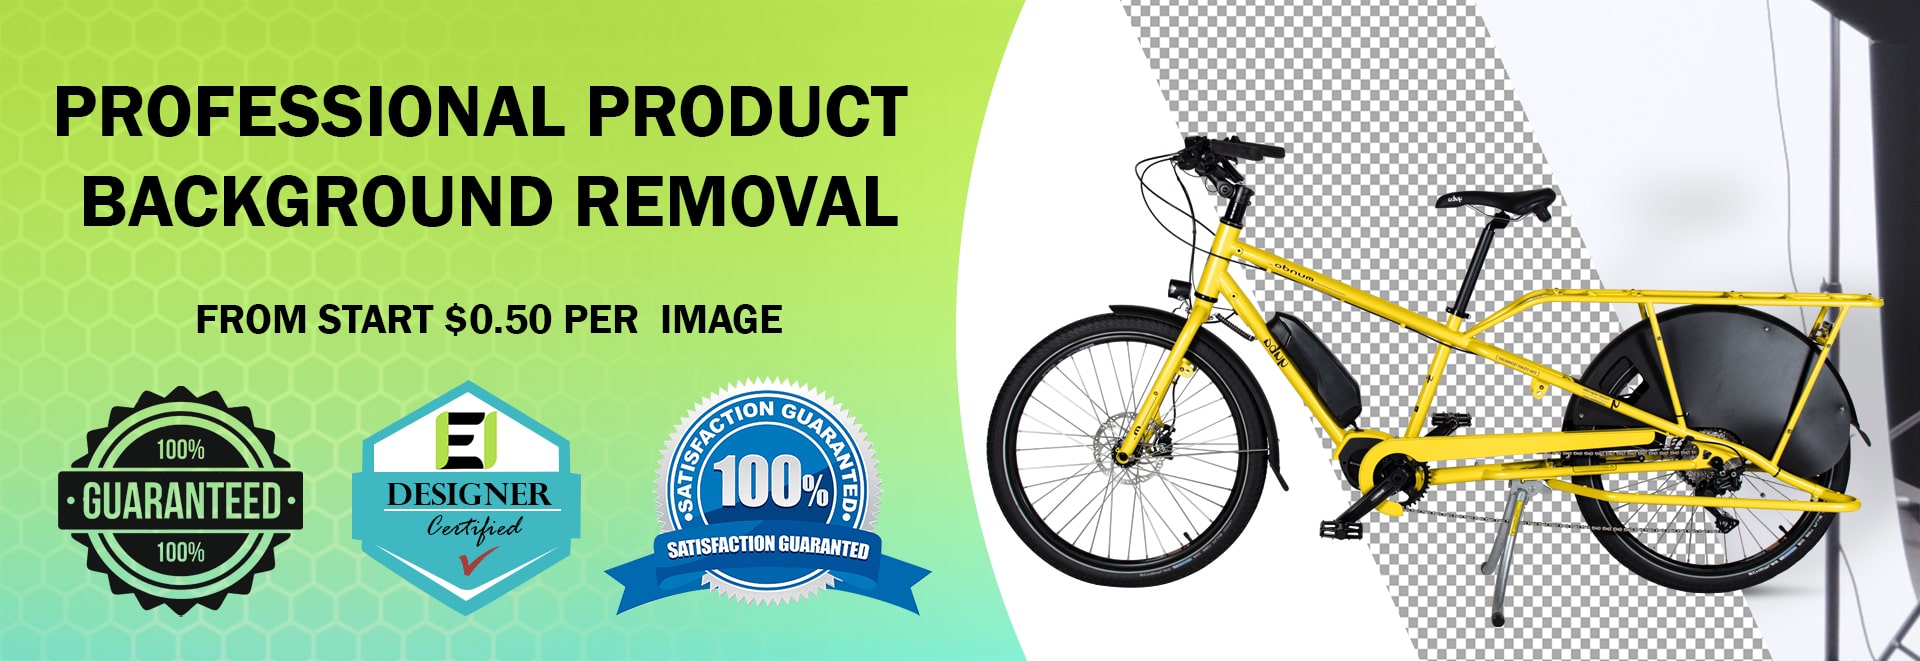 Image Background Removal Service | Background Remove Photos